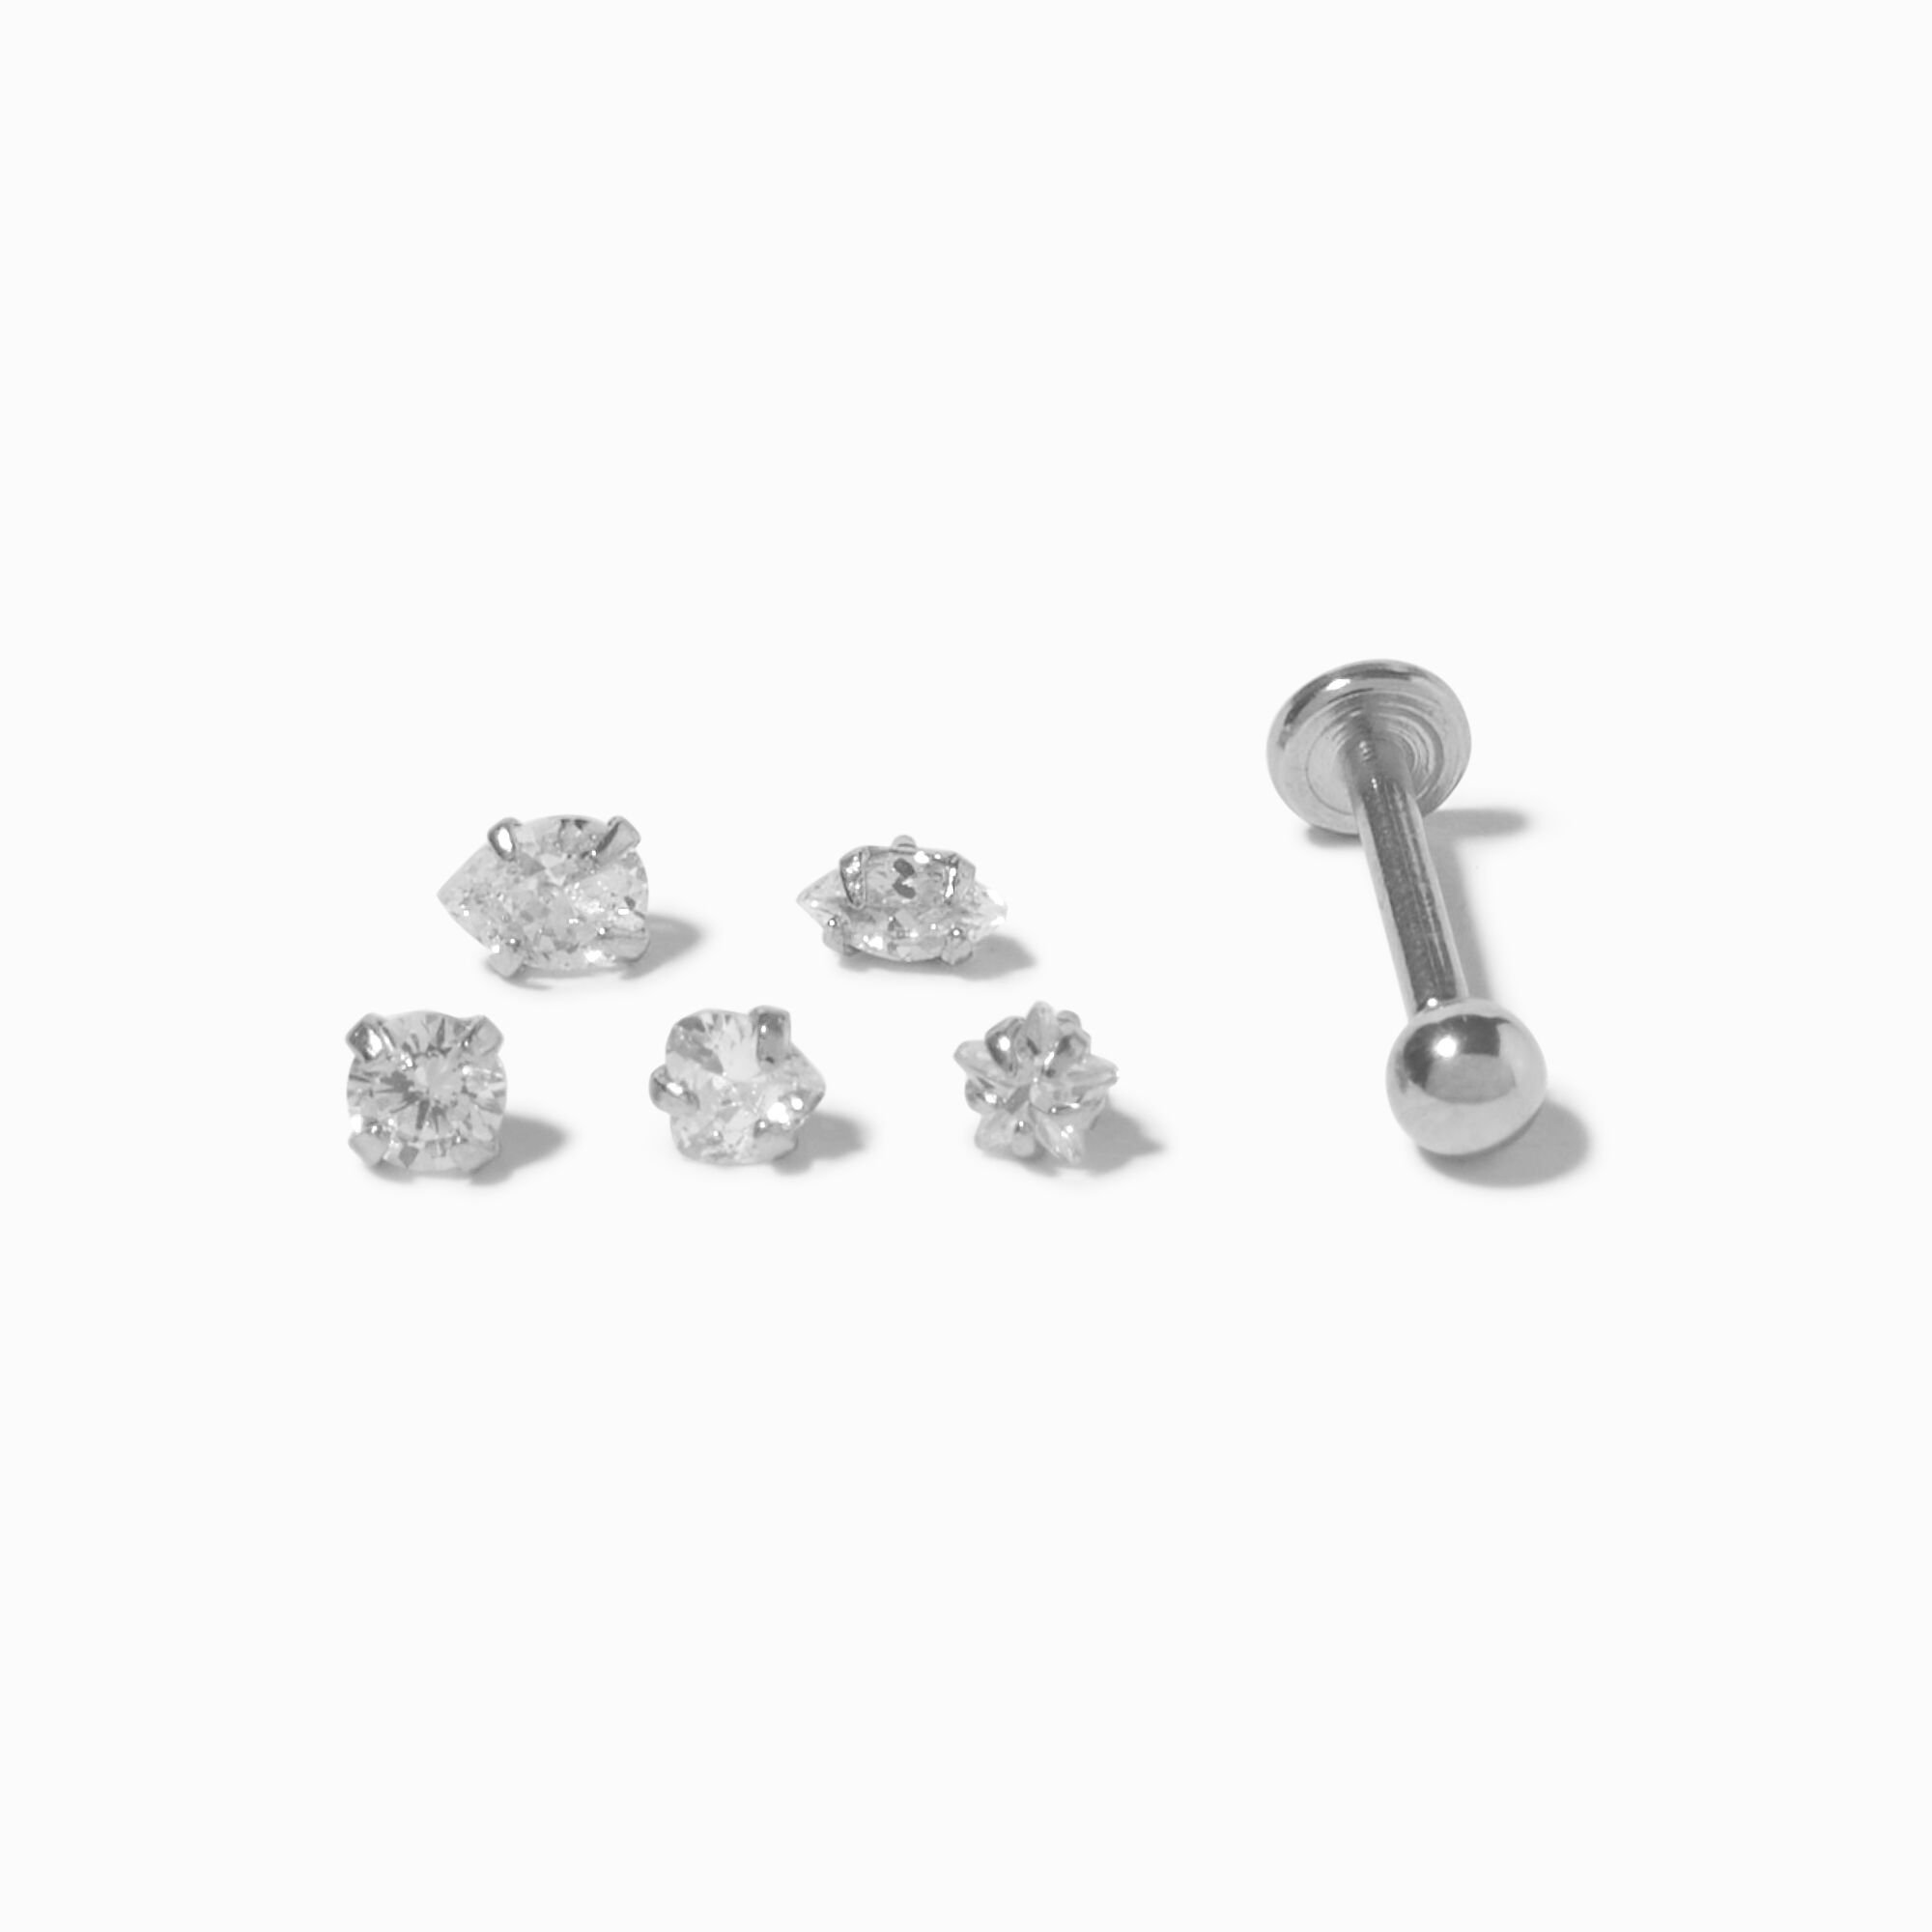 View Claires Tone Multi Cubic Zirconia Changeable 16G Tragus Flat Back Earrings 6 Pack Silver information